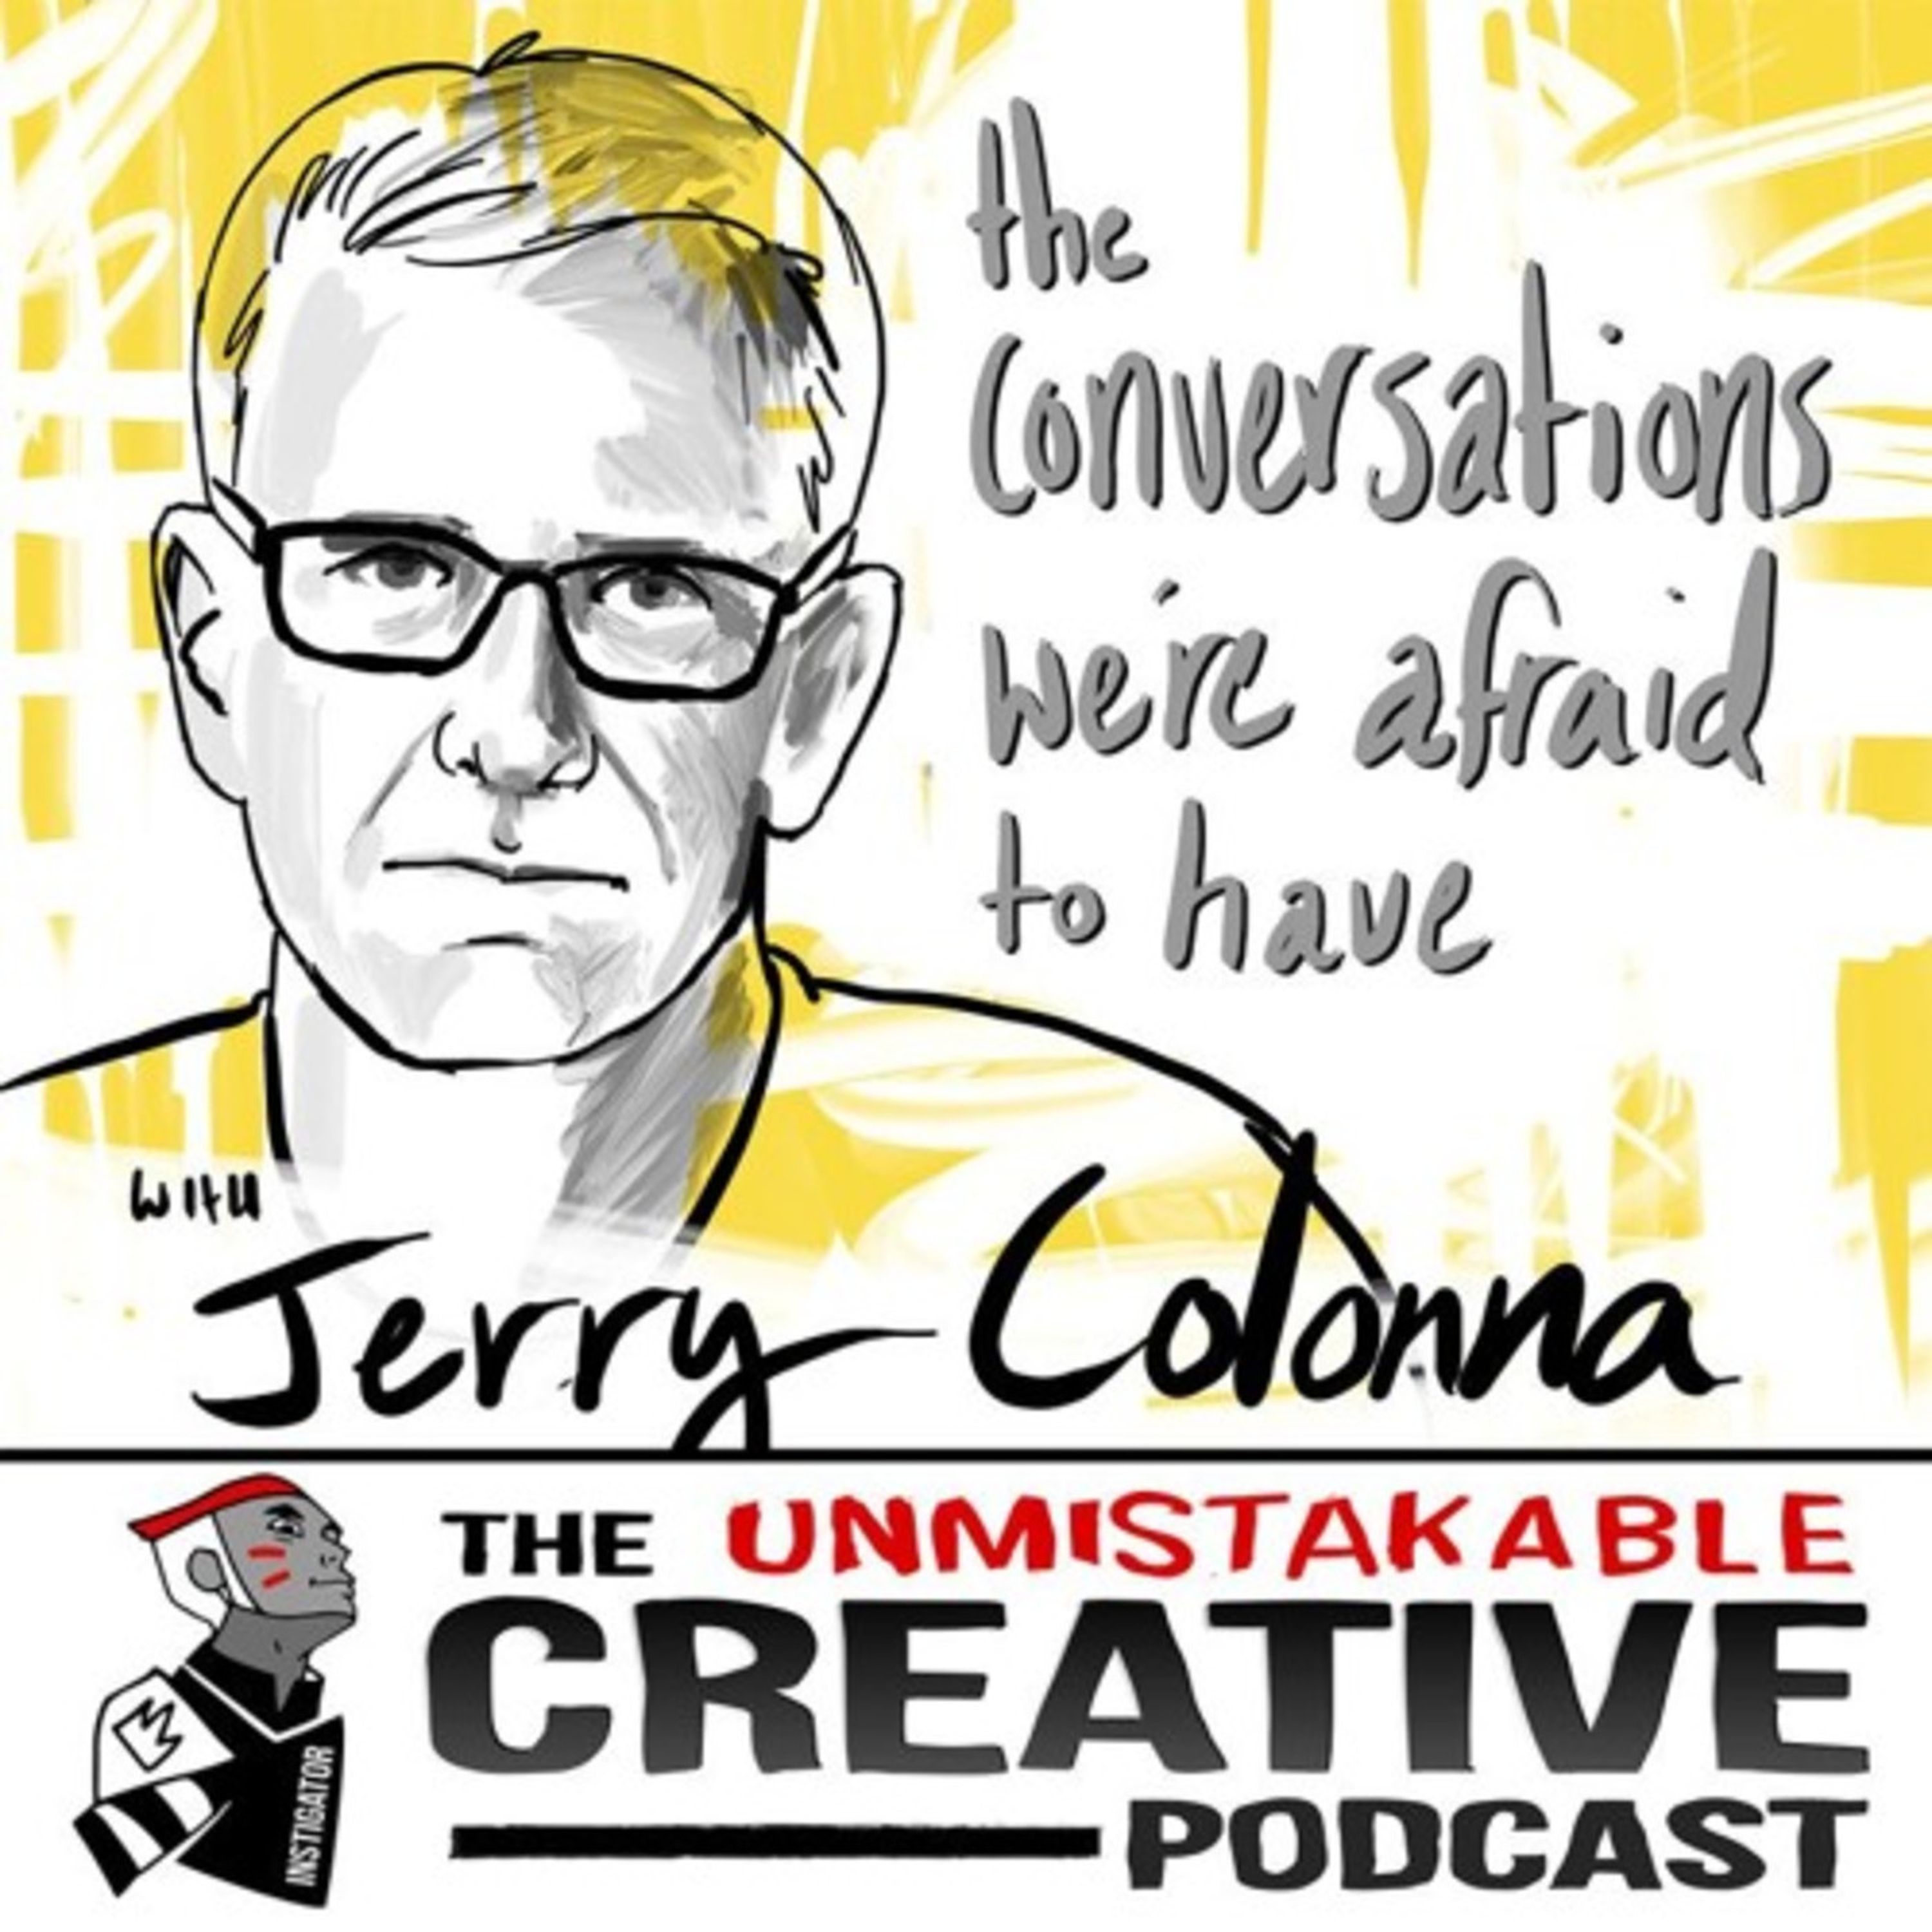 Best of: The Conversations We’re Afraid to Have with Jerry Colonna